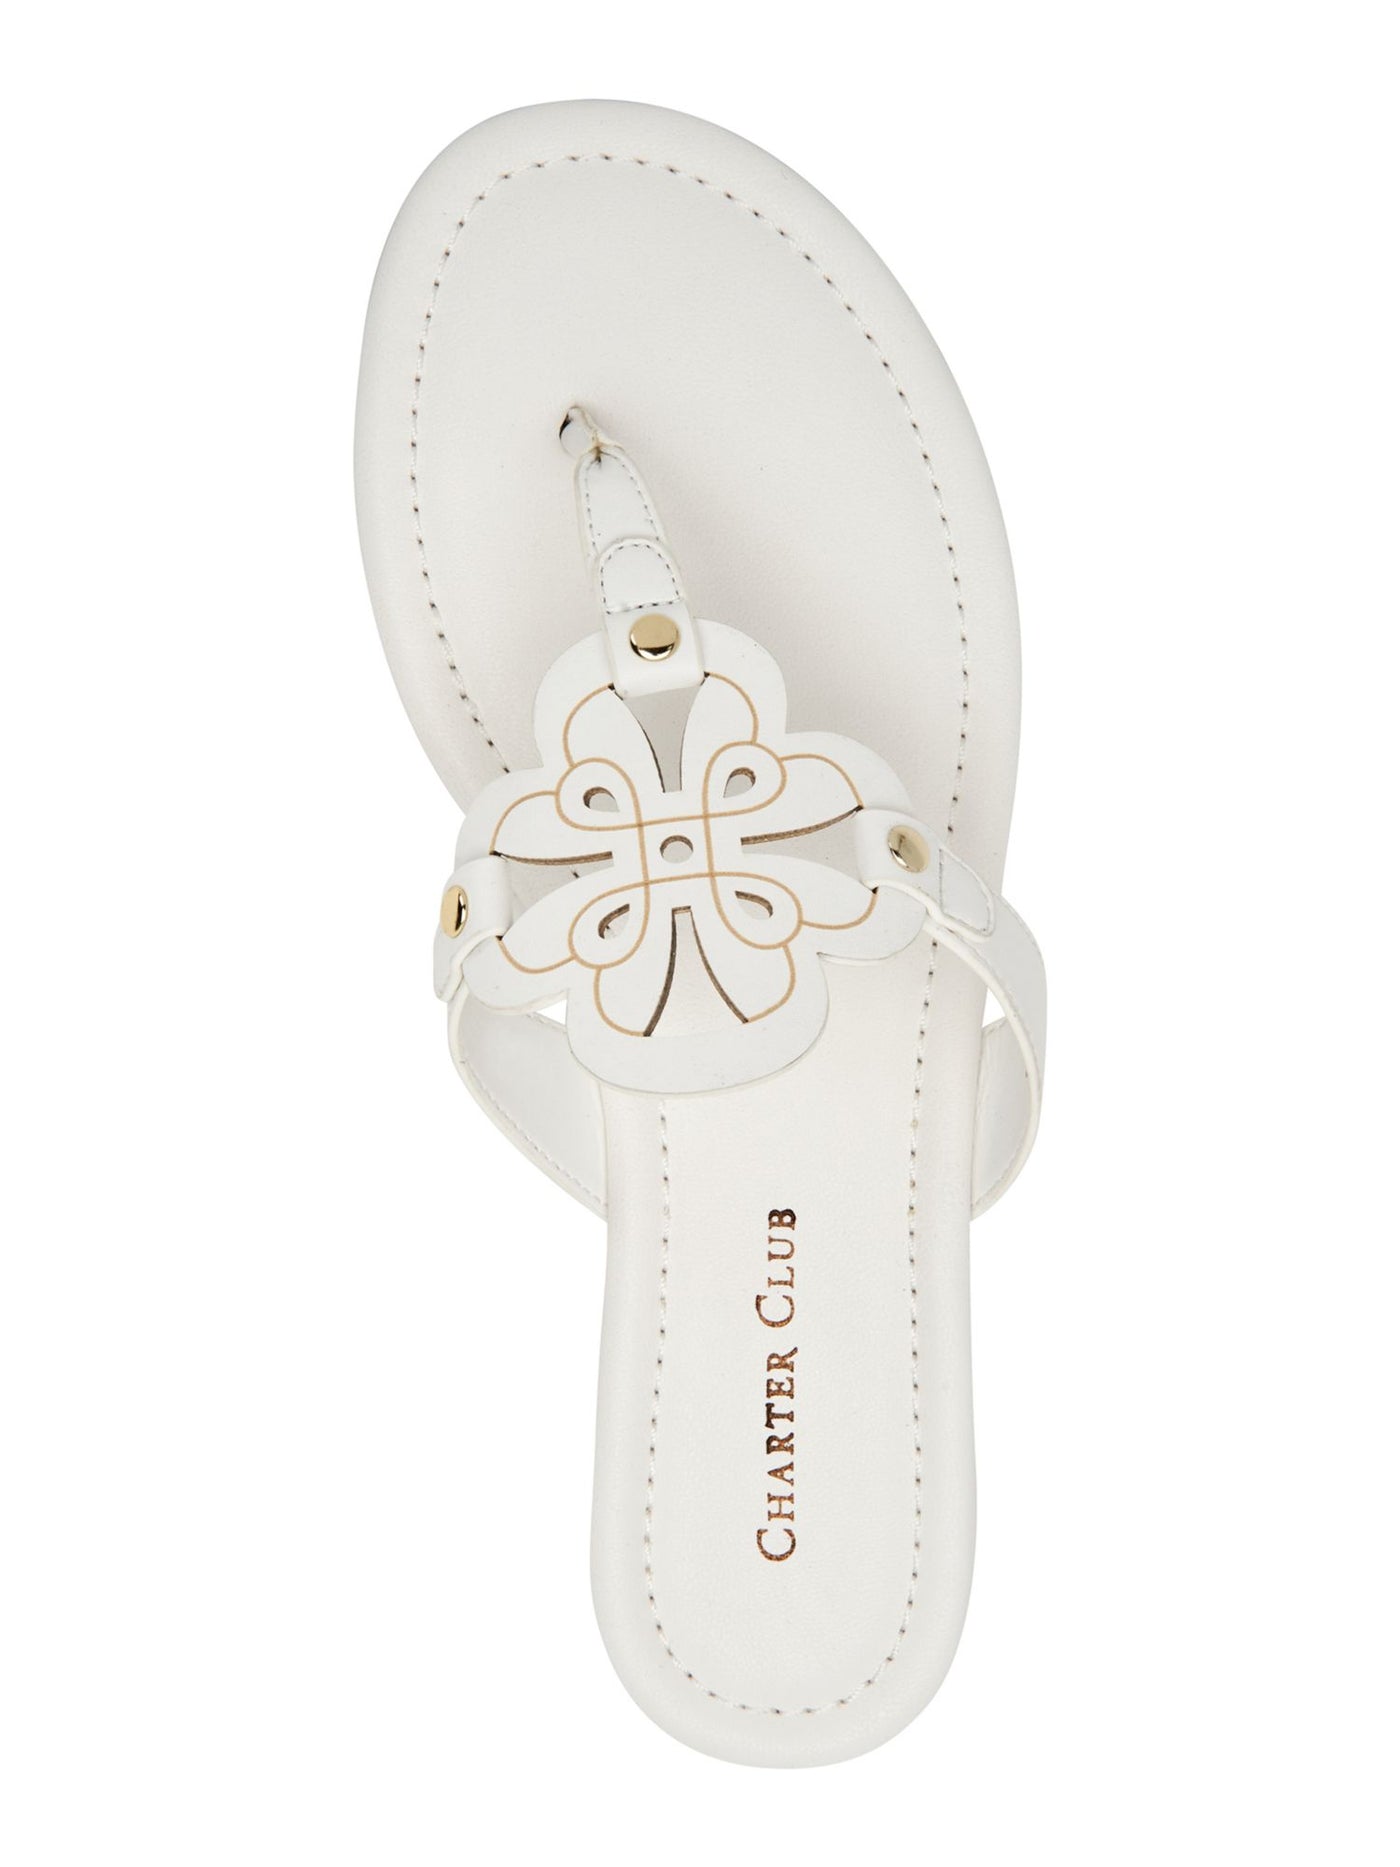 CHARTER CLUB Womens White Cut Out Studded Padded Ozella Round Toe Wedge Slip On Flip Flop Sandal 6 M